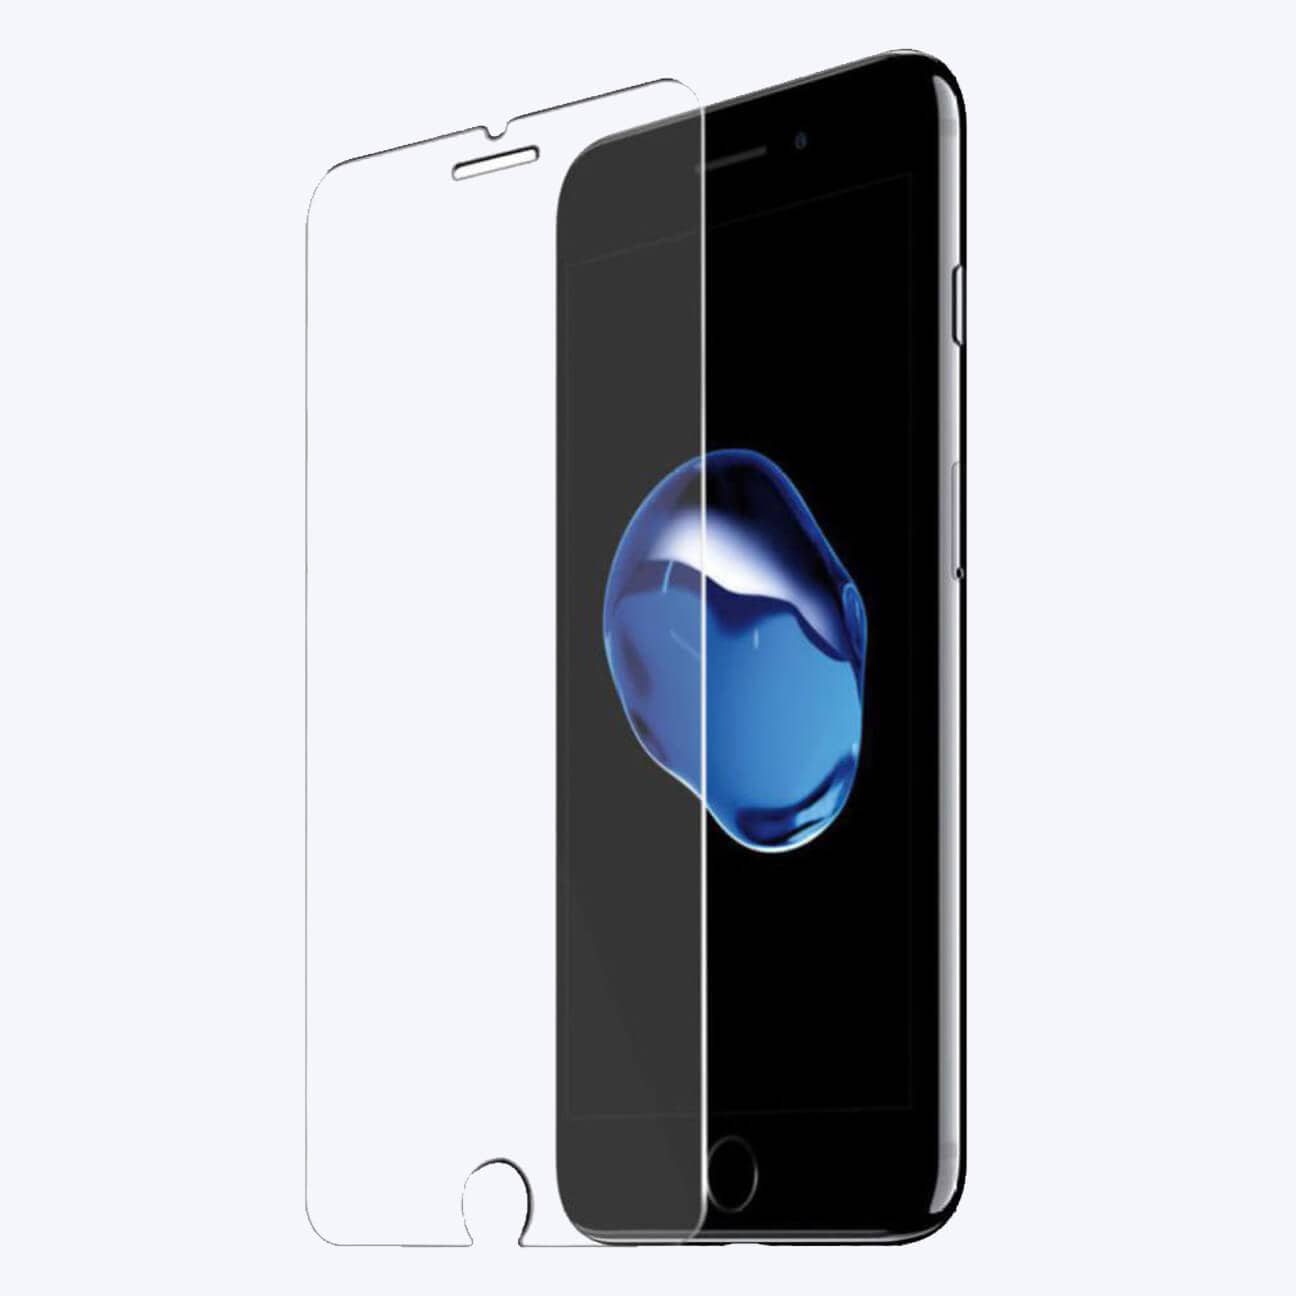 iPhone 6,6s Tempered Glass Screen Protector